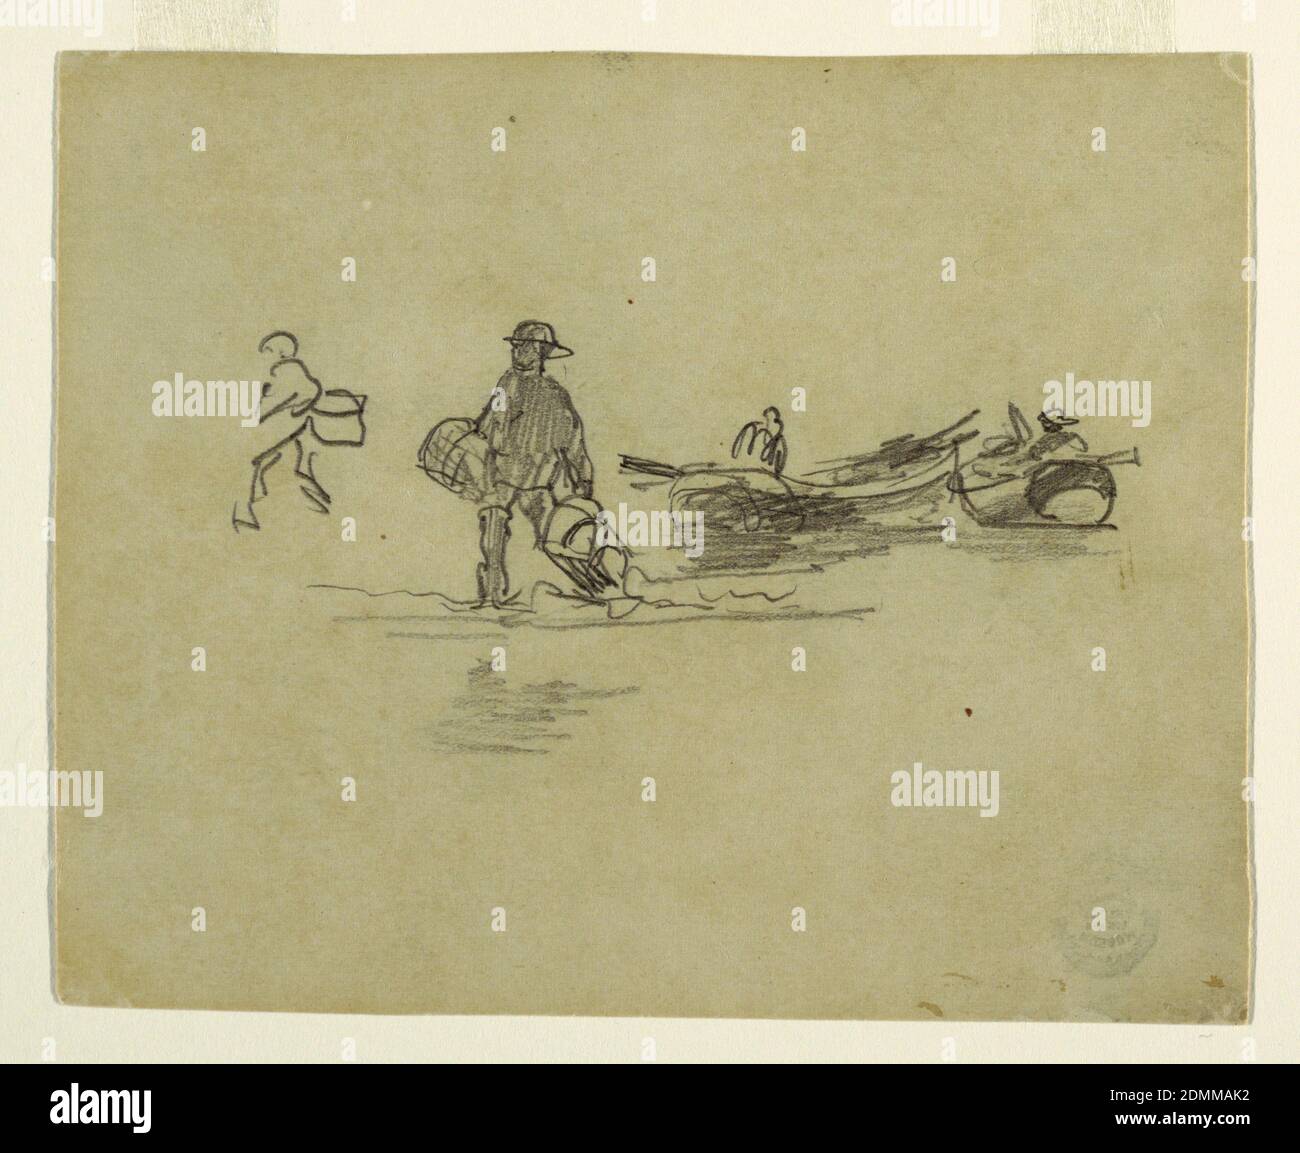 Two Fishermen, England, Winslow Homer, American, 1836–1910, Graphite on gray paper, Recto: Horizontal view of the beach with two fishermen's dories, and two men walking through shallow water carrying baskets., Verso: Slight sketch of a beached dory and fishermen, Cullercoats, England, USA, 1881–82, seascapes, Drawing Stock Photo